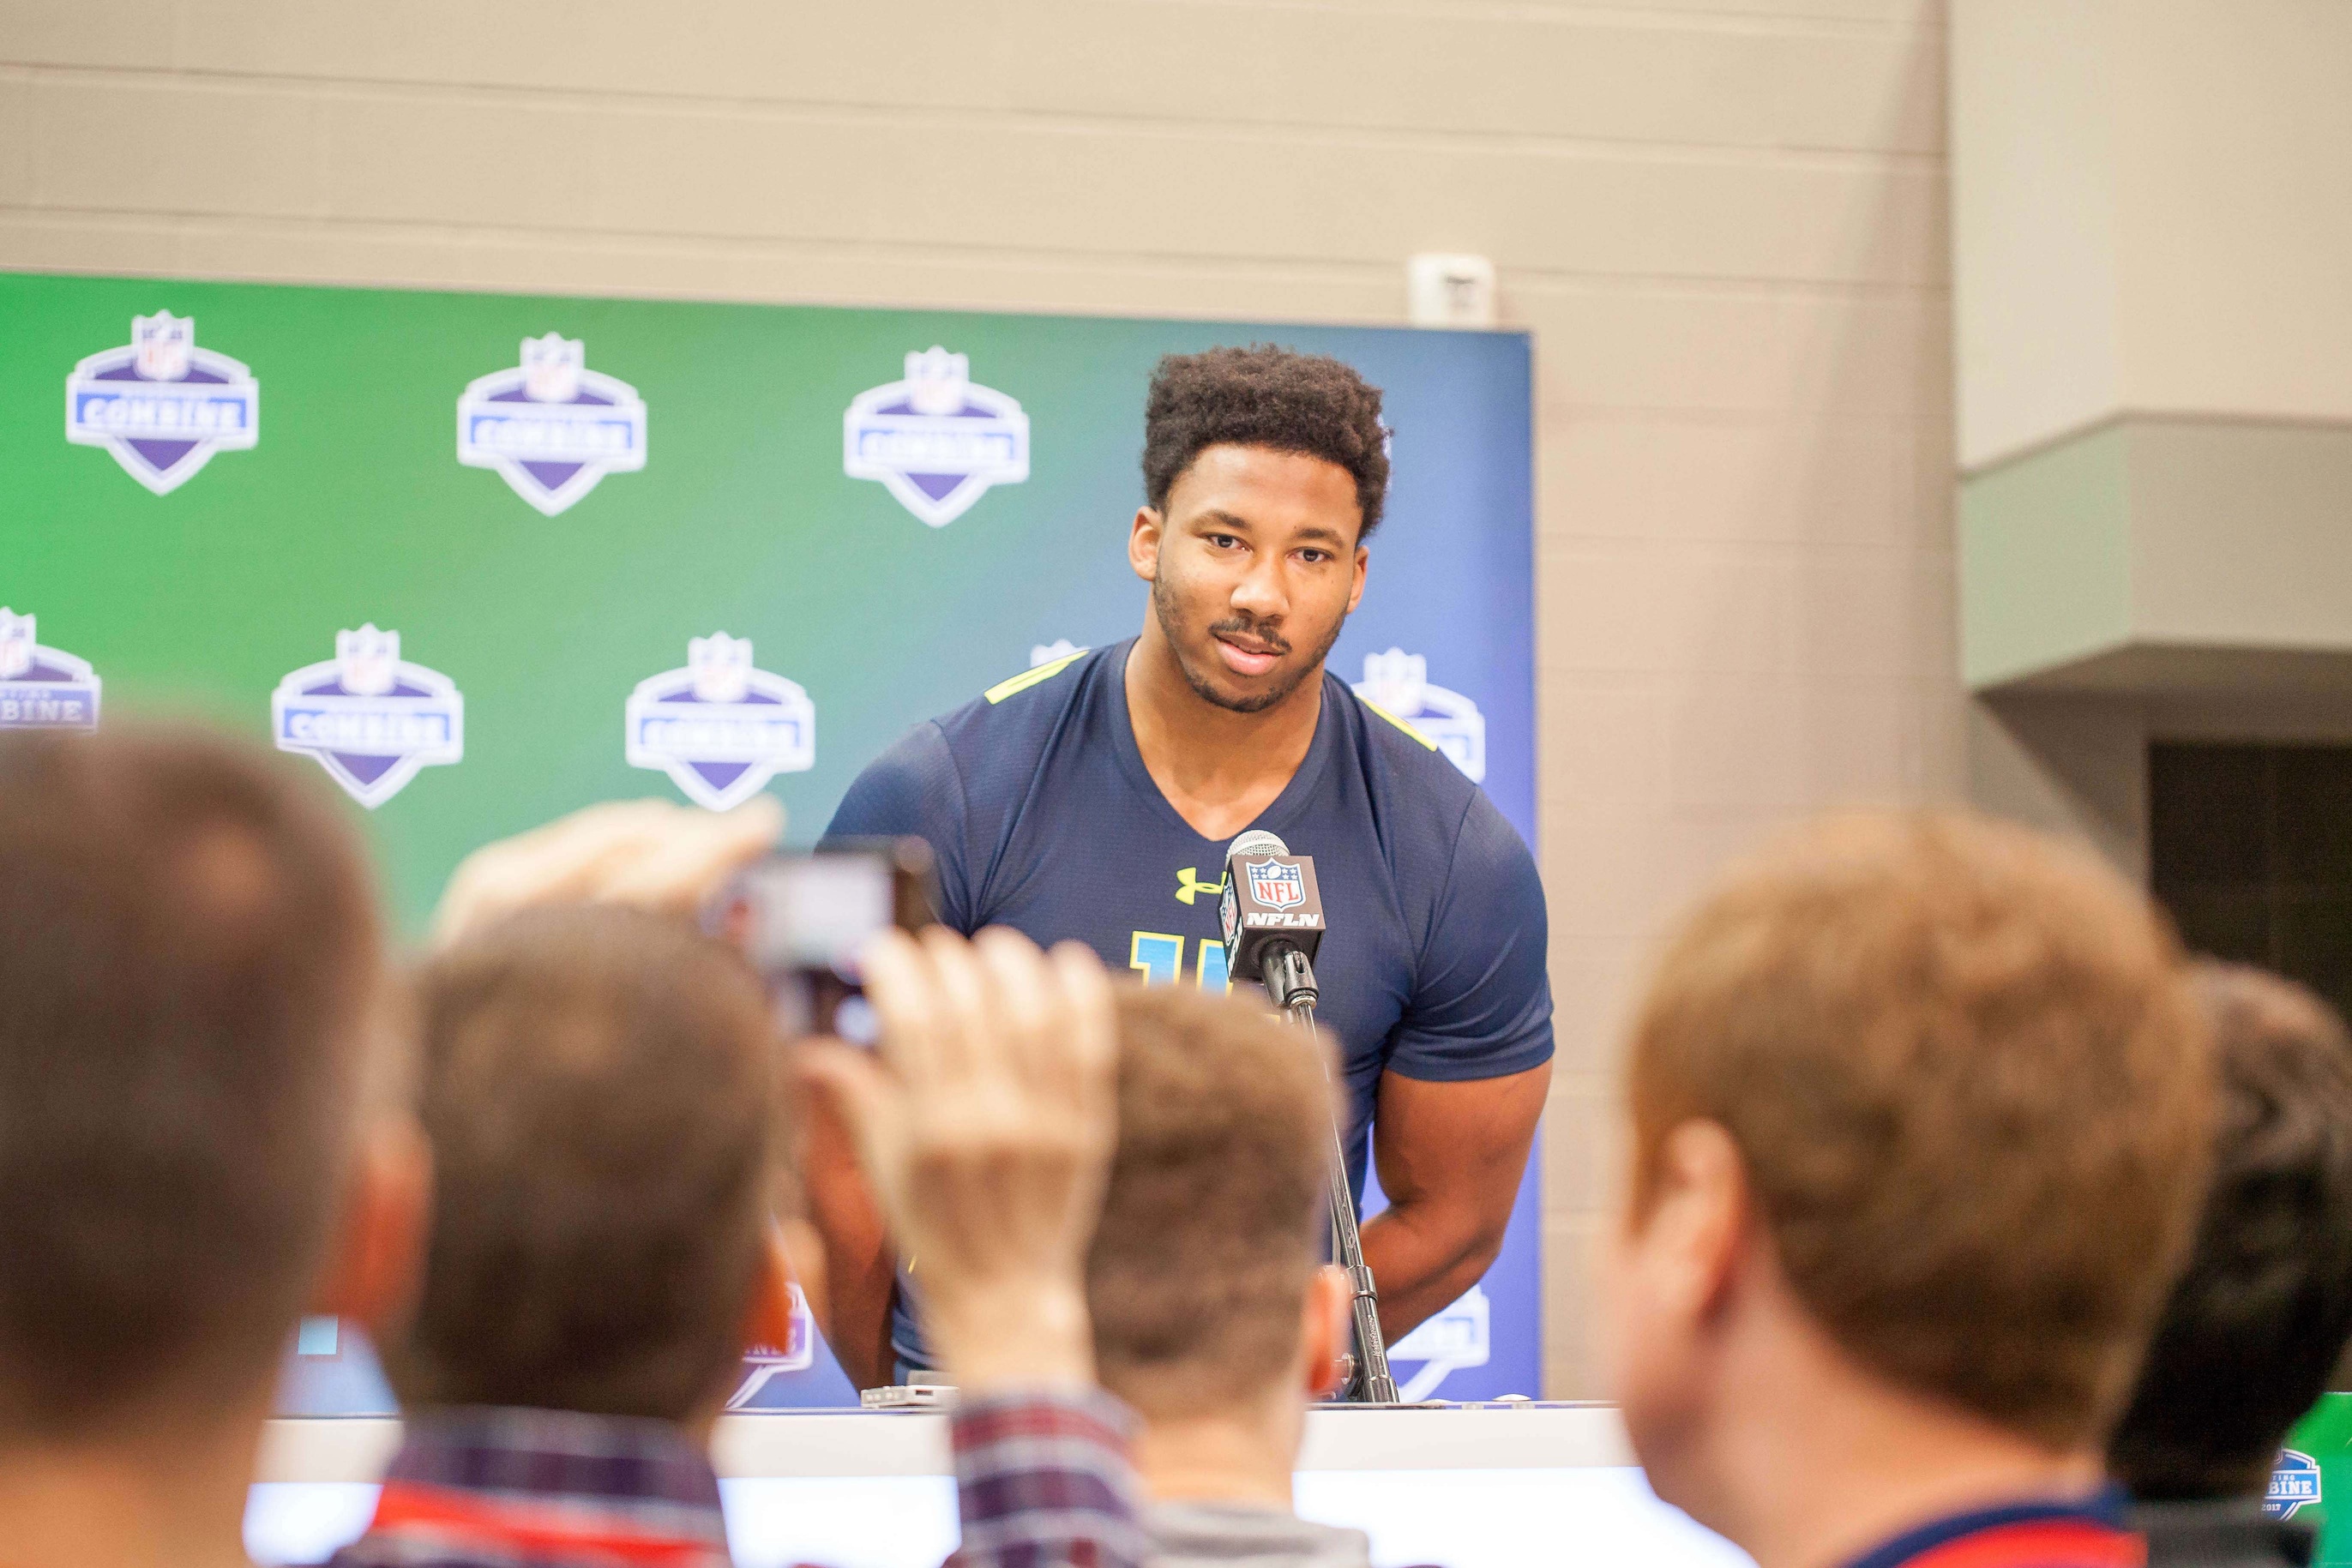 Mar 4, 2017; Indianapolis, IN, USA; Texas A&M defensive end Myles Garrett speaks to the media during the 2017 combine at Indiana Convention Center. Mandatory Credit: Trevor Ruszkowski-USA TODAY Sports